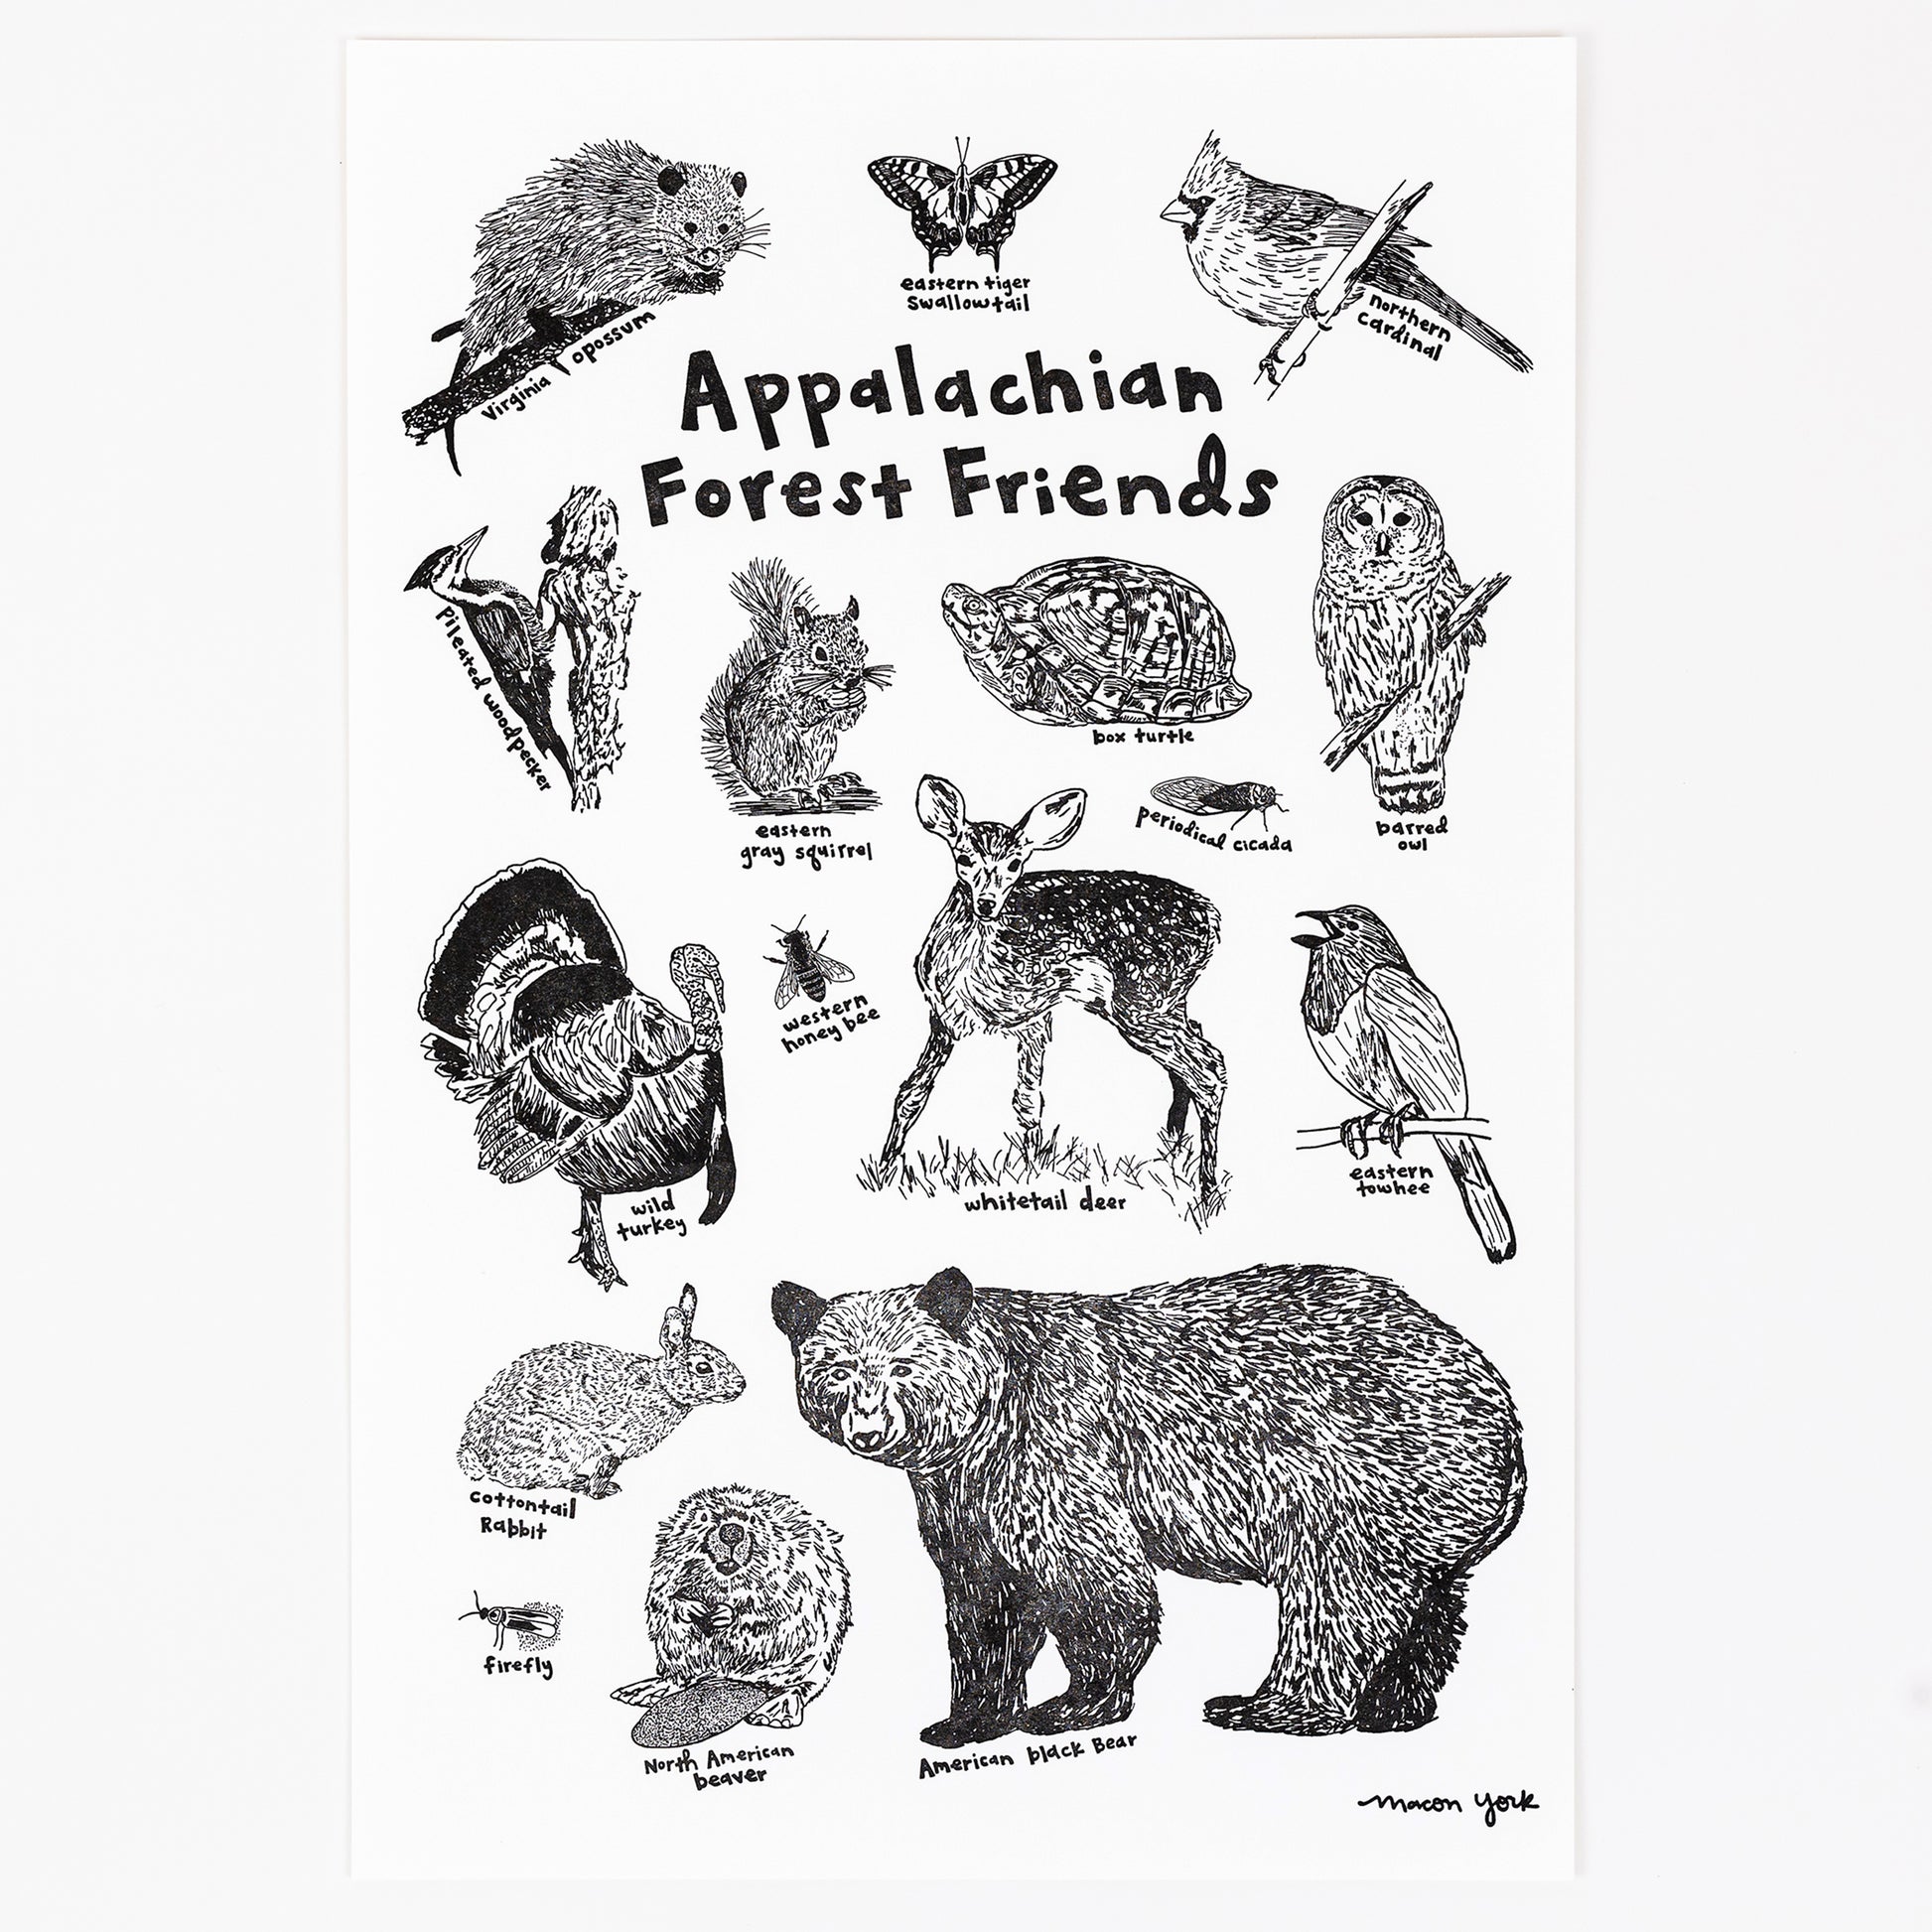 A large (12" x 18") Letterpress Art Print featuring hand-drawn animals in the Appalachain Mountain region. This letterpress-printed piece features an array of adorable woodland hand-drawn critters sure to bring a bit of woodland whimsy to your decor. Each critter is labeled with hand-drawn text, so it's educational, too!